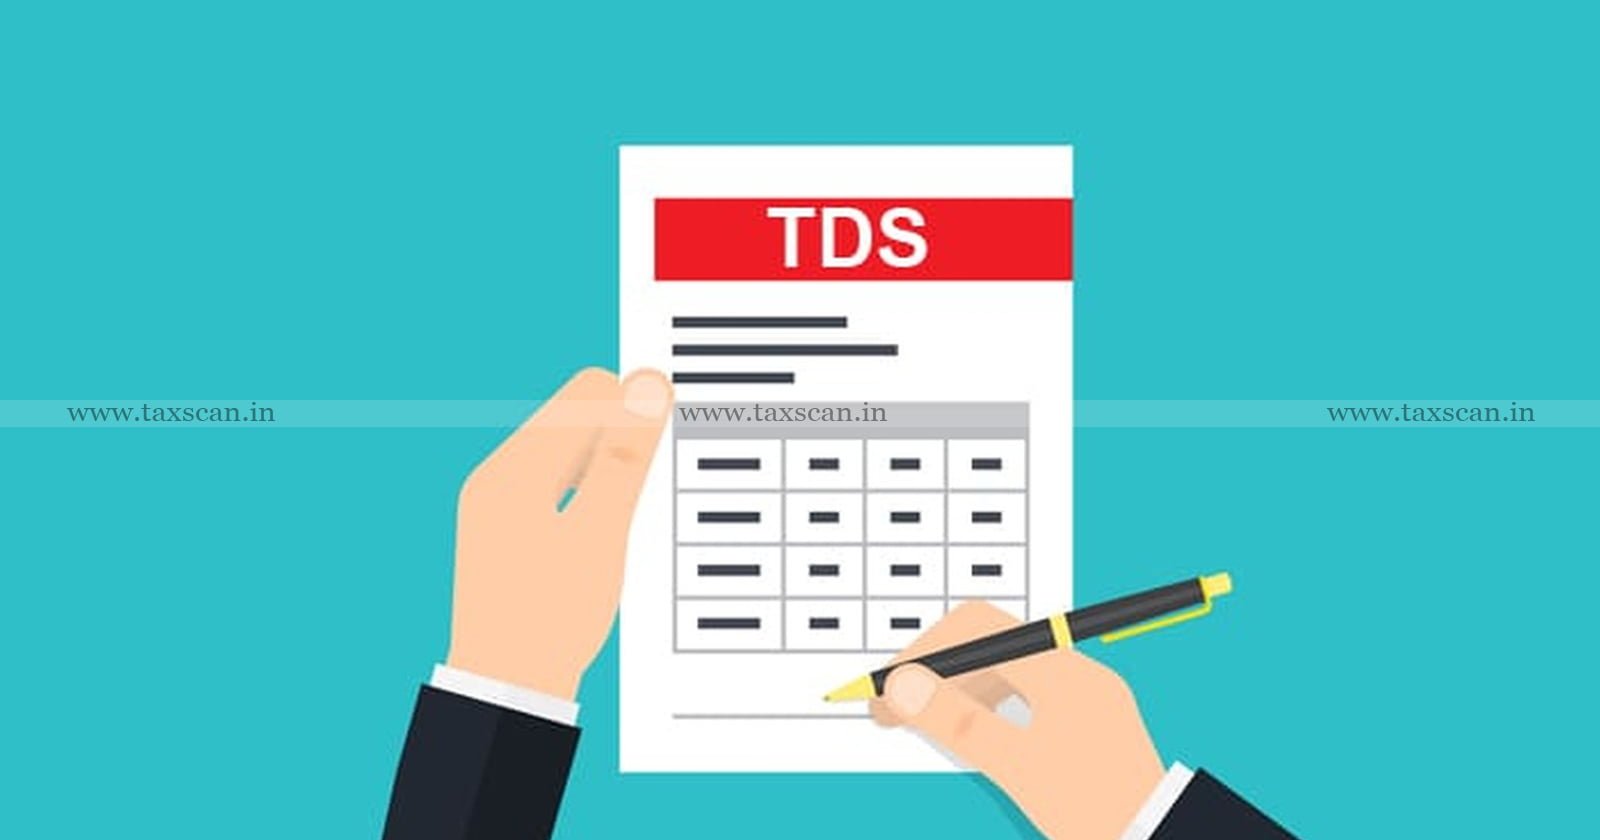 TDS - Common Area Maintenance Charges - ITAT - Taxscan